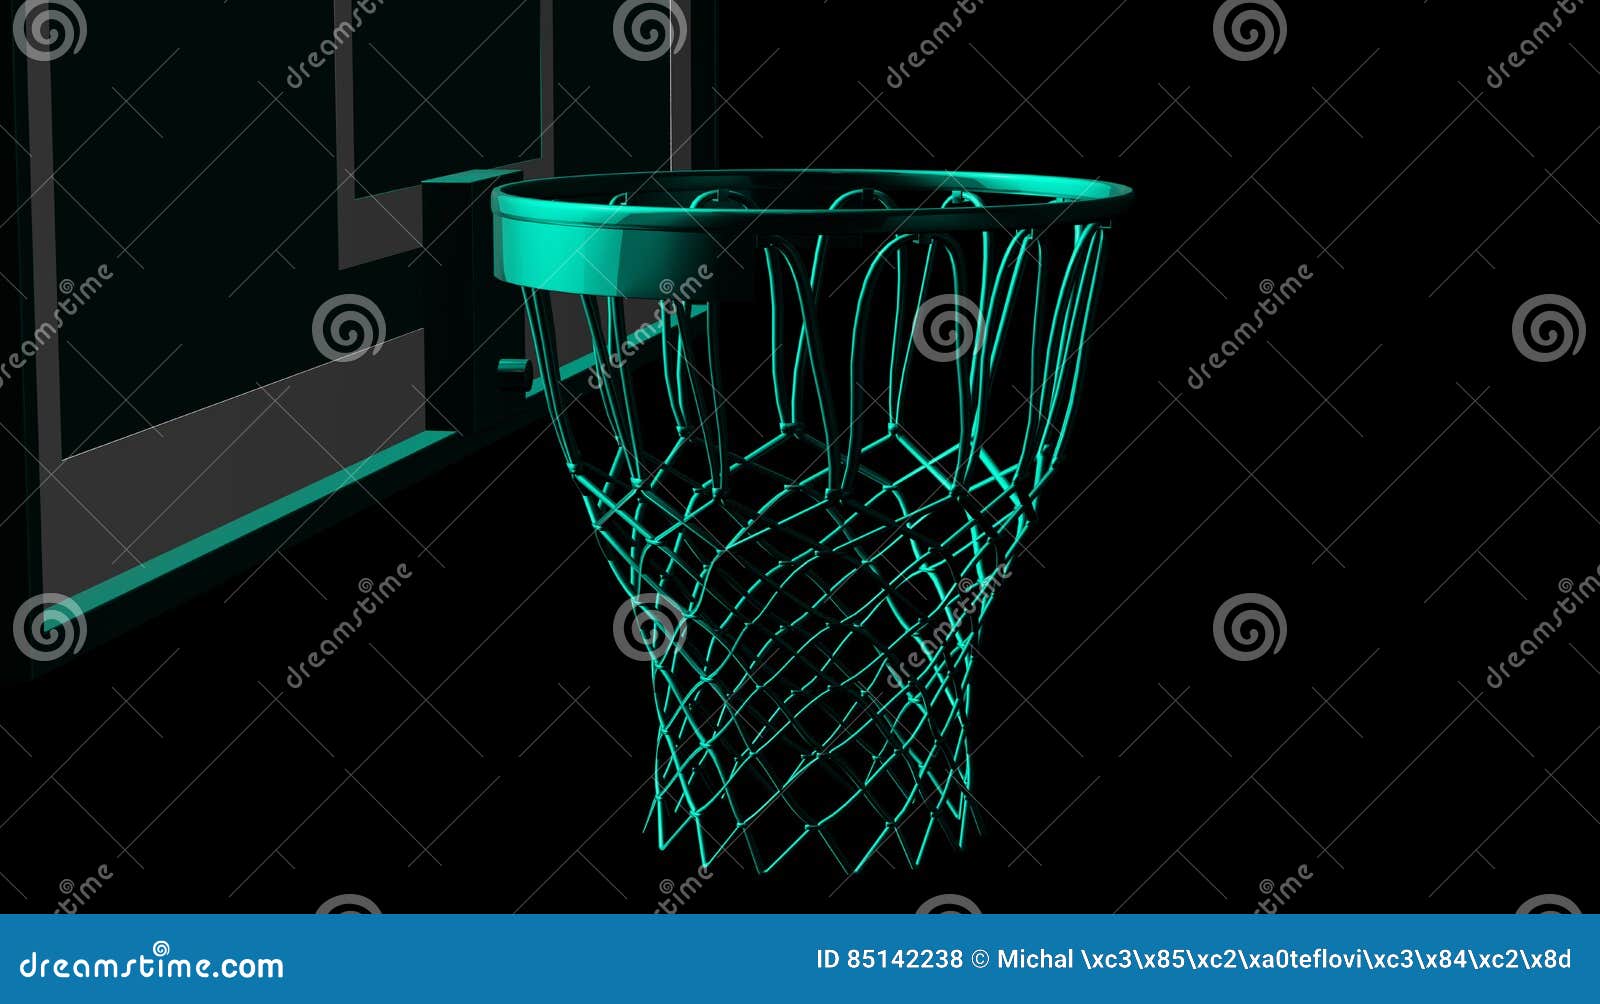 Green Net of a Basketball Hoop on Various Material and Background